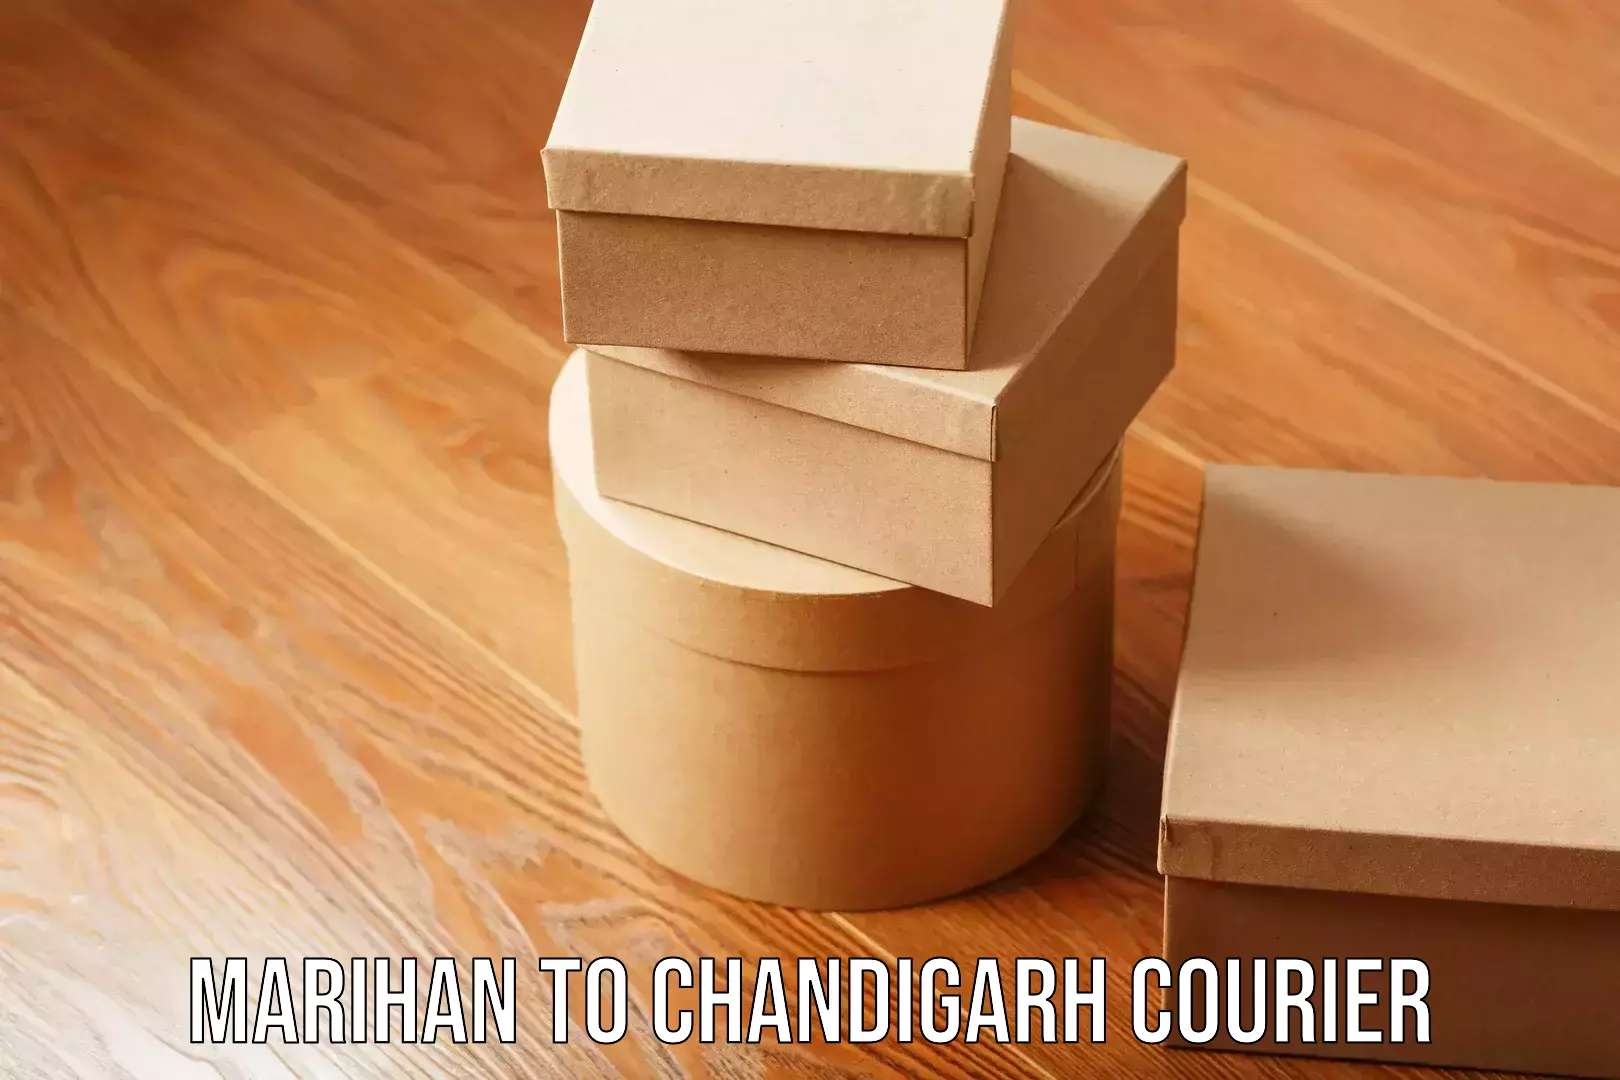 Home shifting services Marihan to Chandigarh